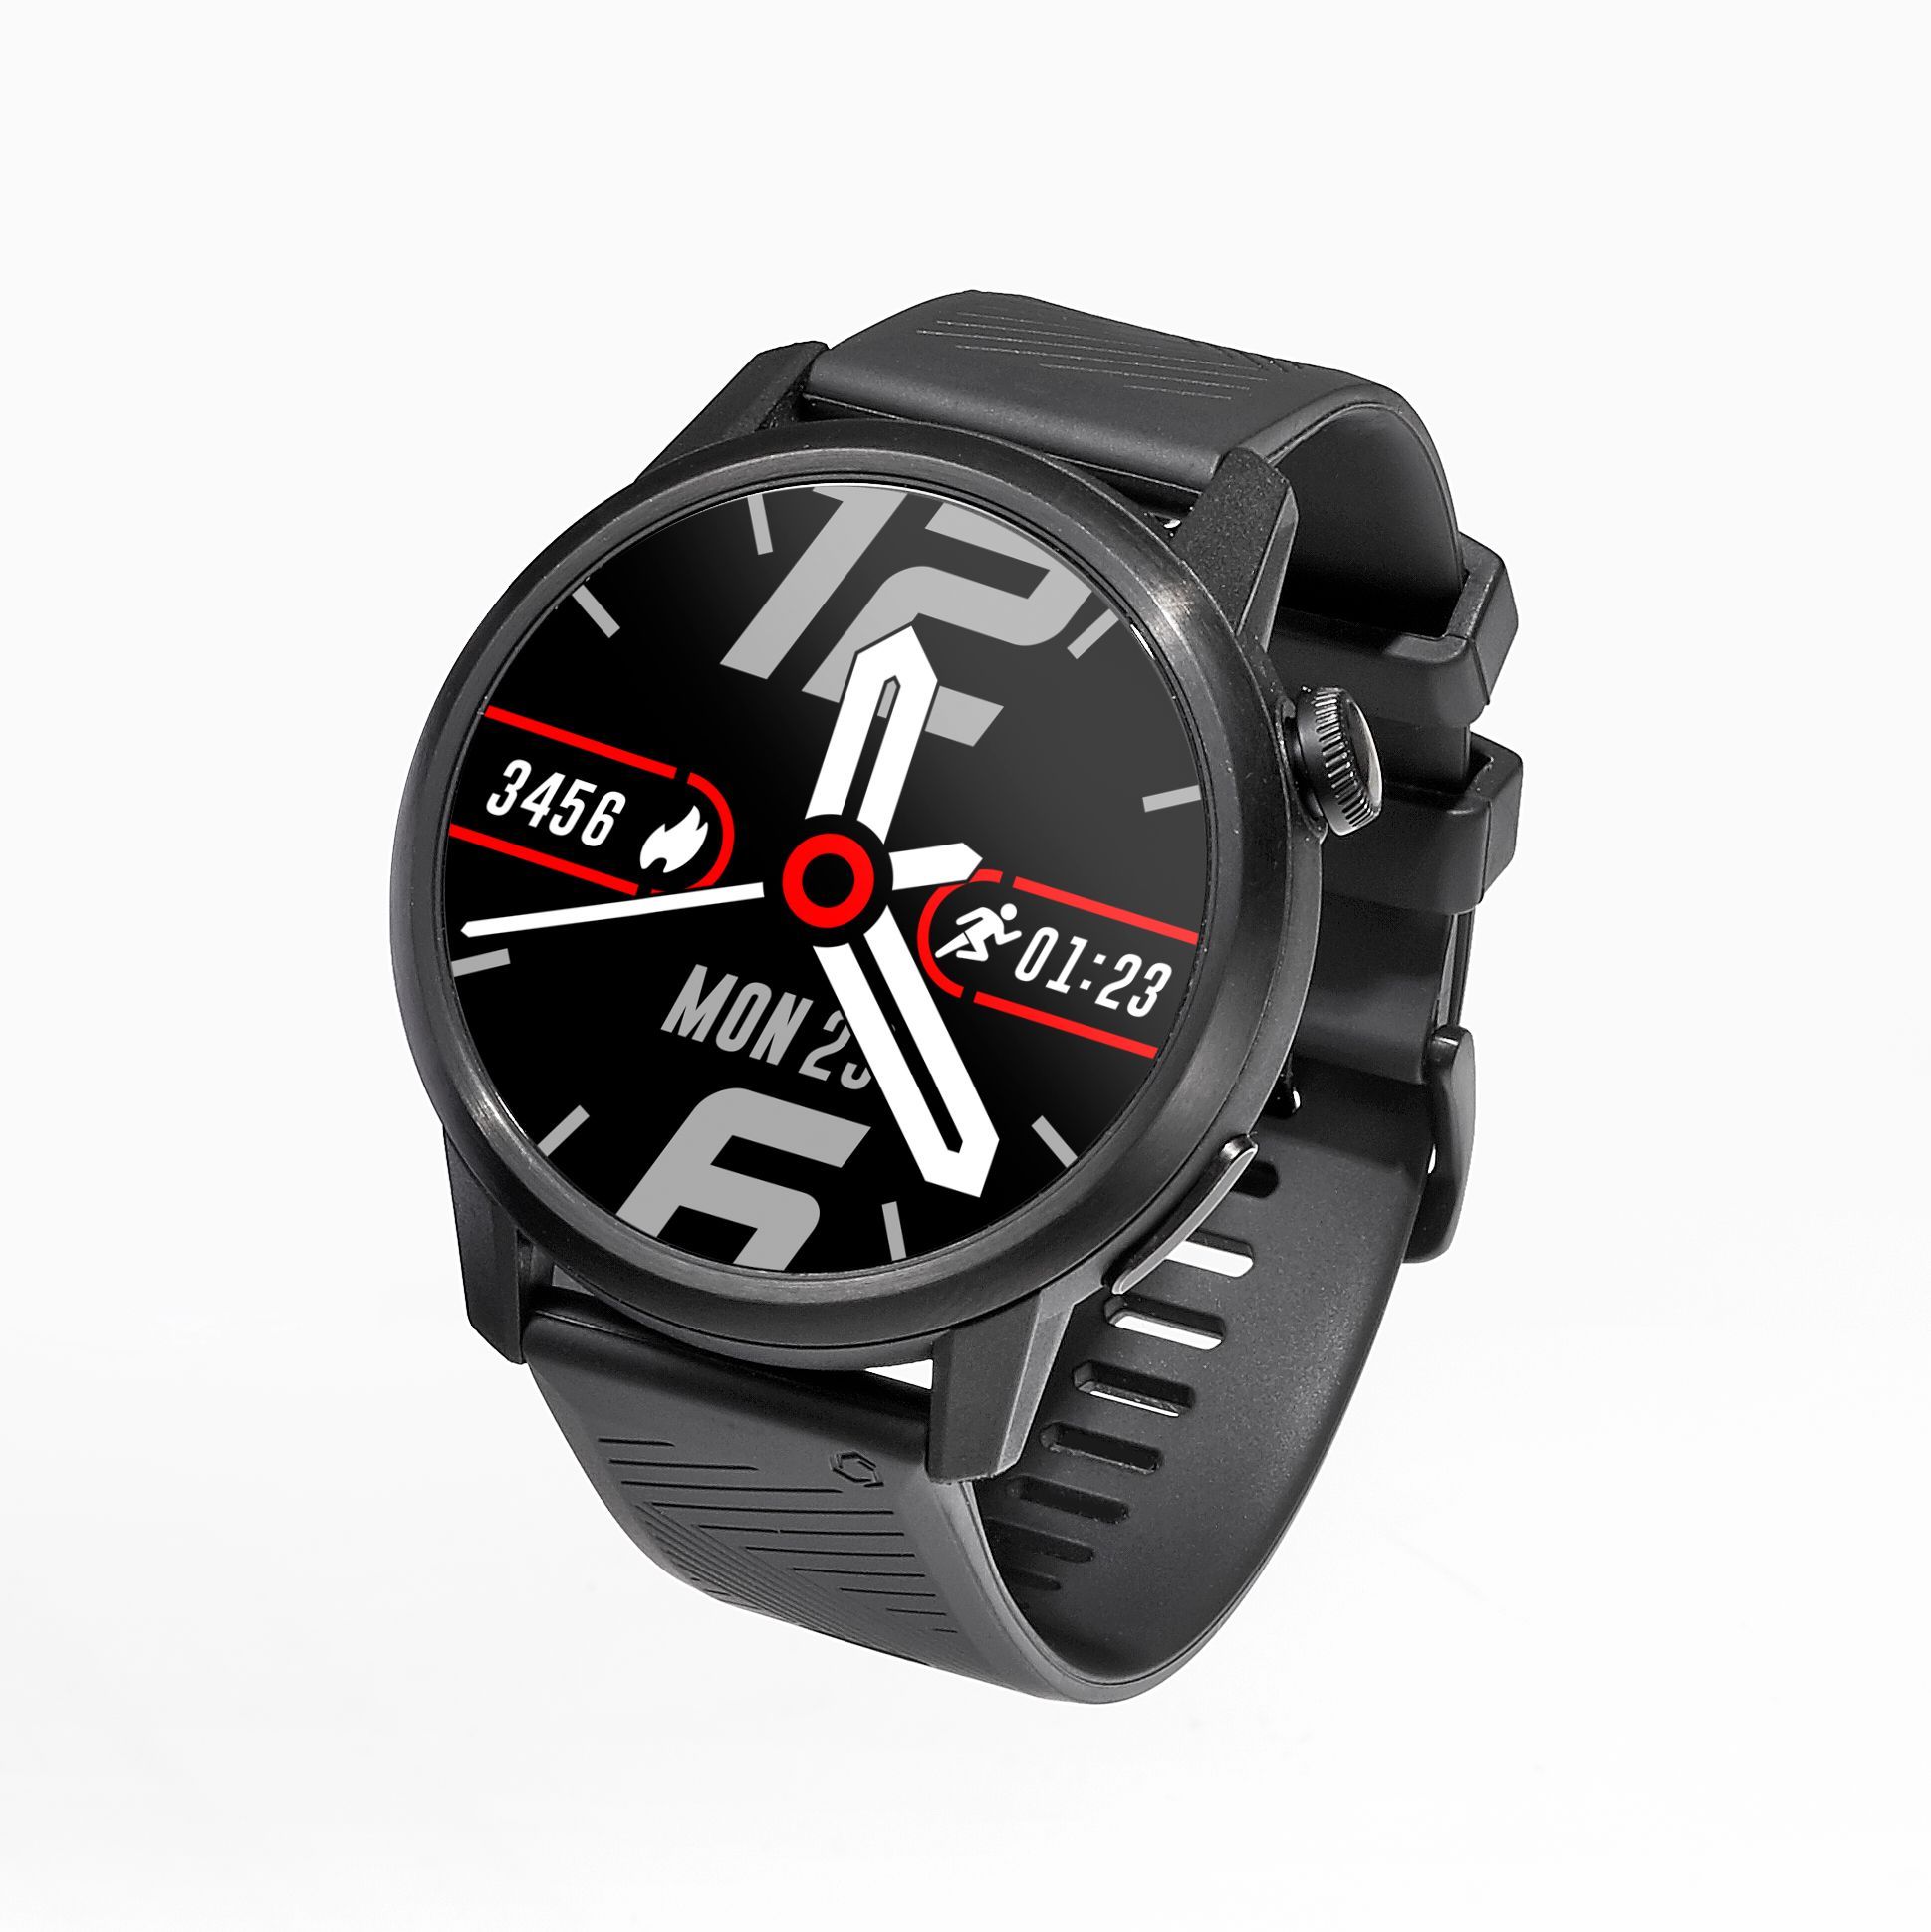 The Best Gps Running Watches Tried And Tested Including Garmin Polar Suunto Coros And More